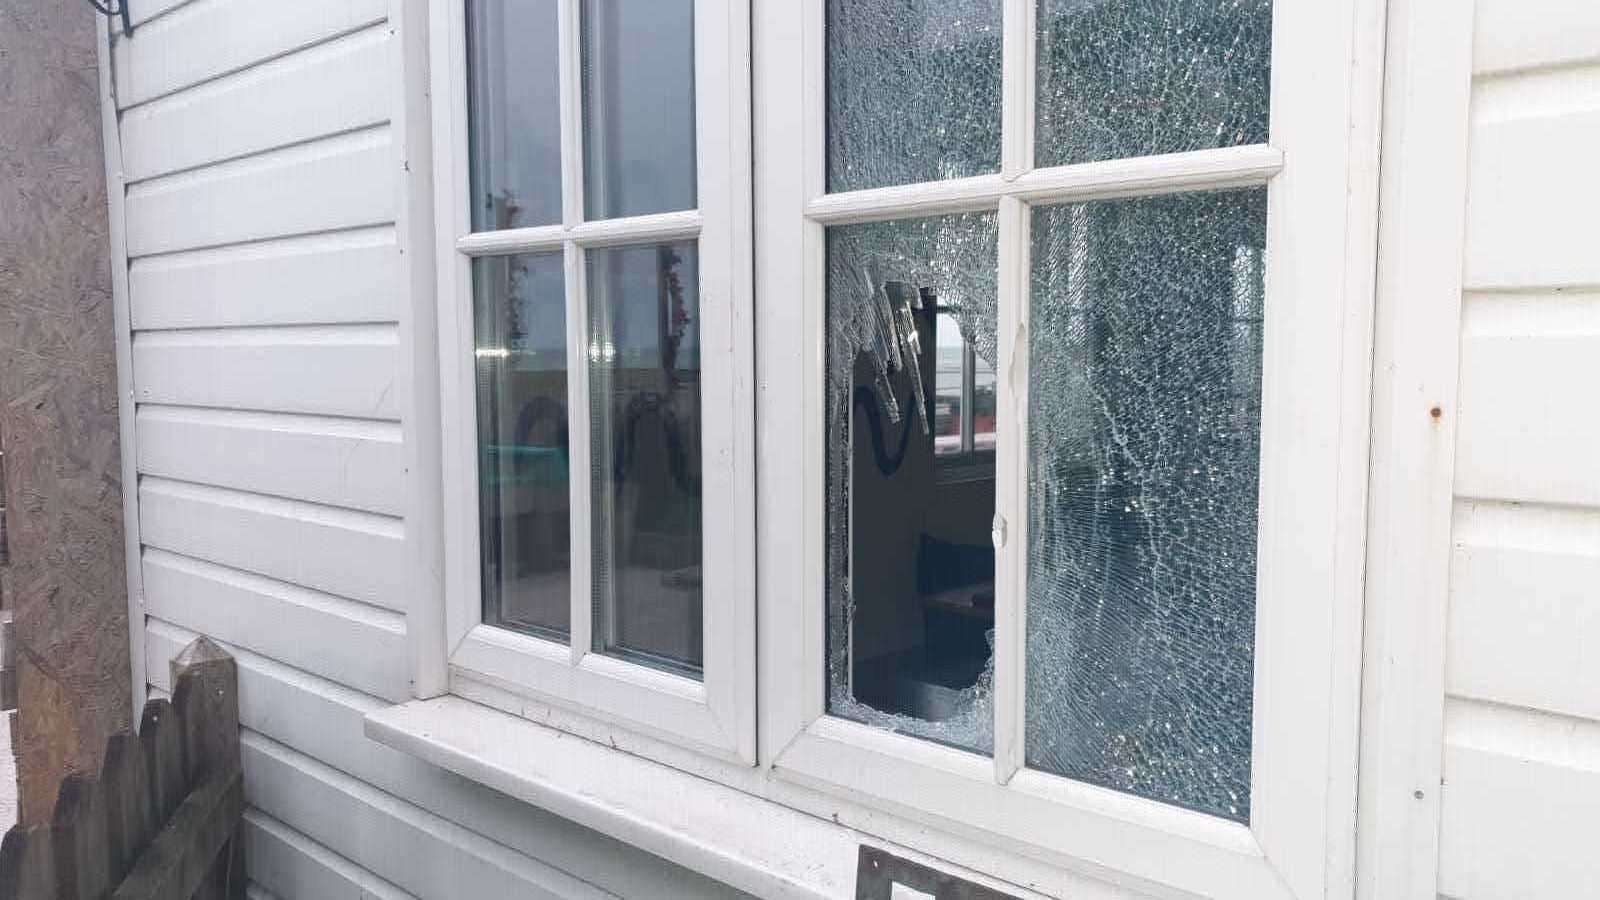 Businesses at the Sun Deck in Margate were targeted by burglars